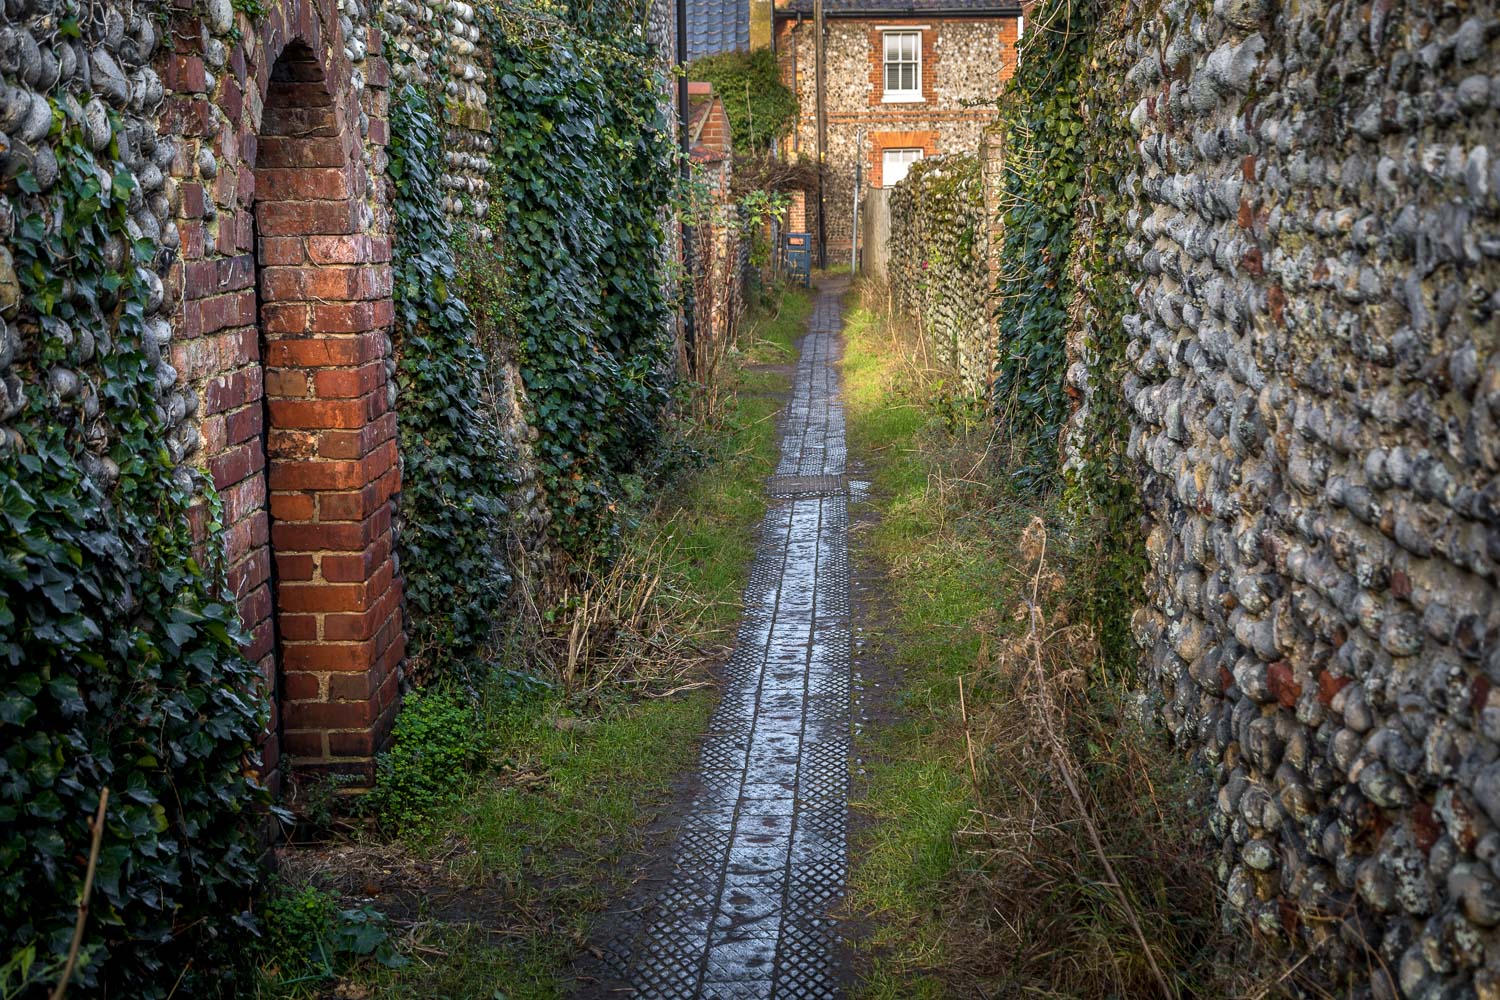 Cley next the Sea, ginnel